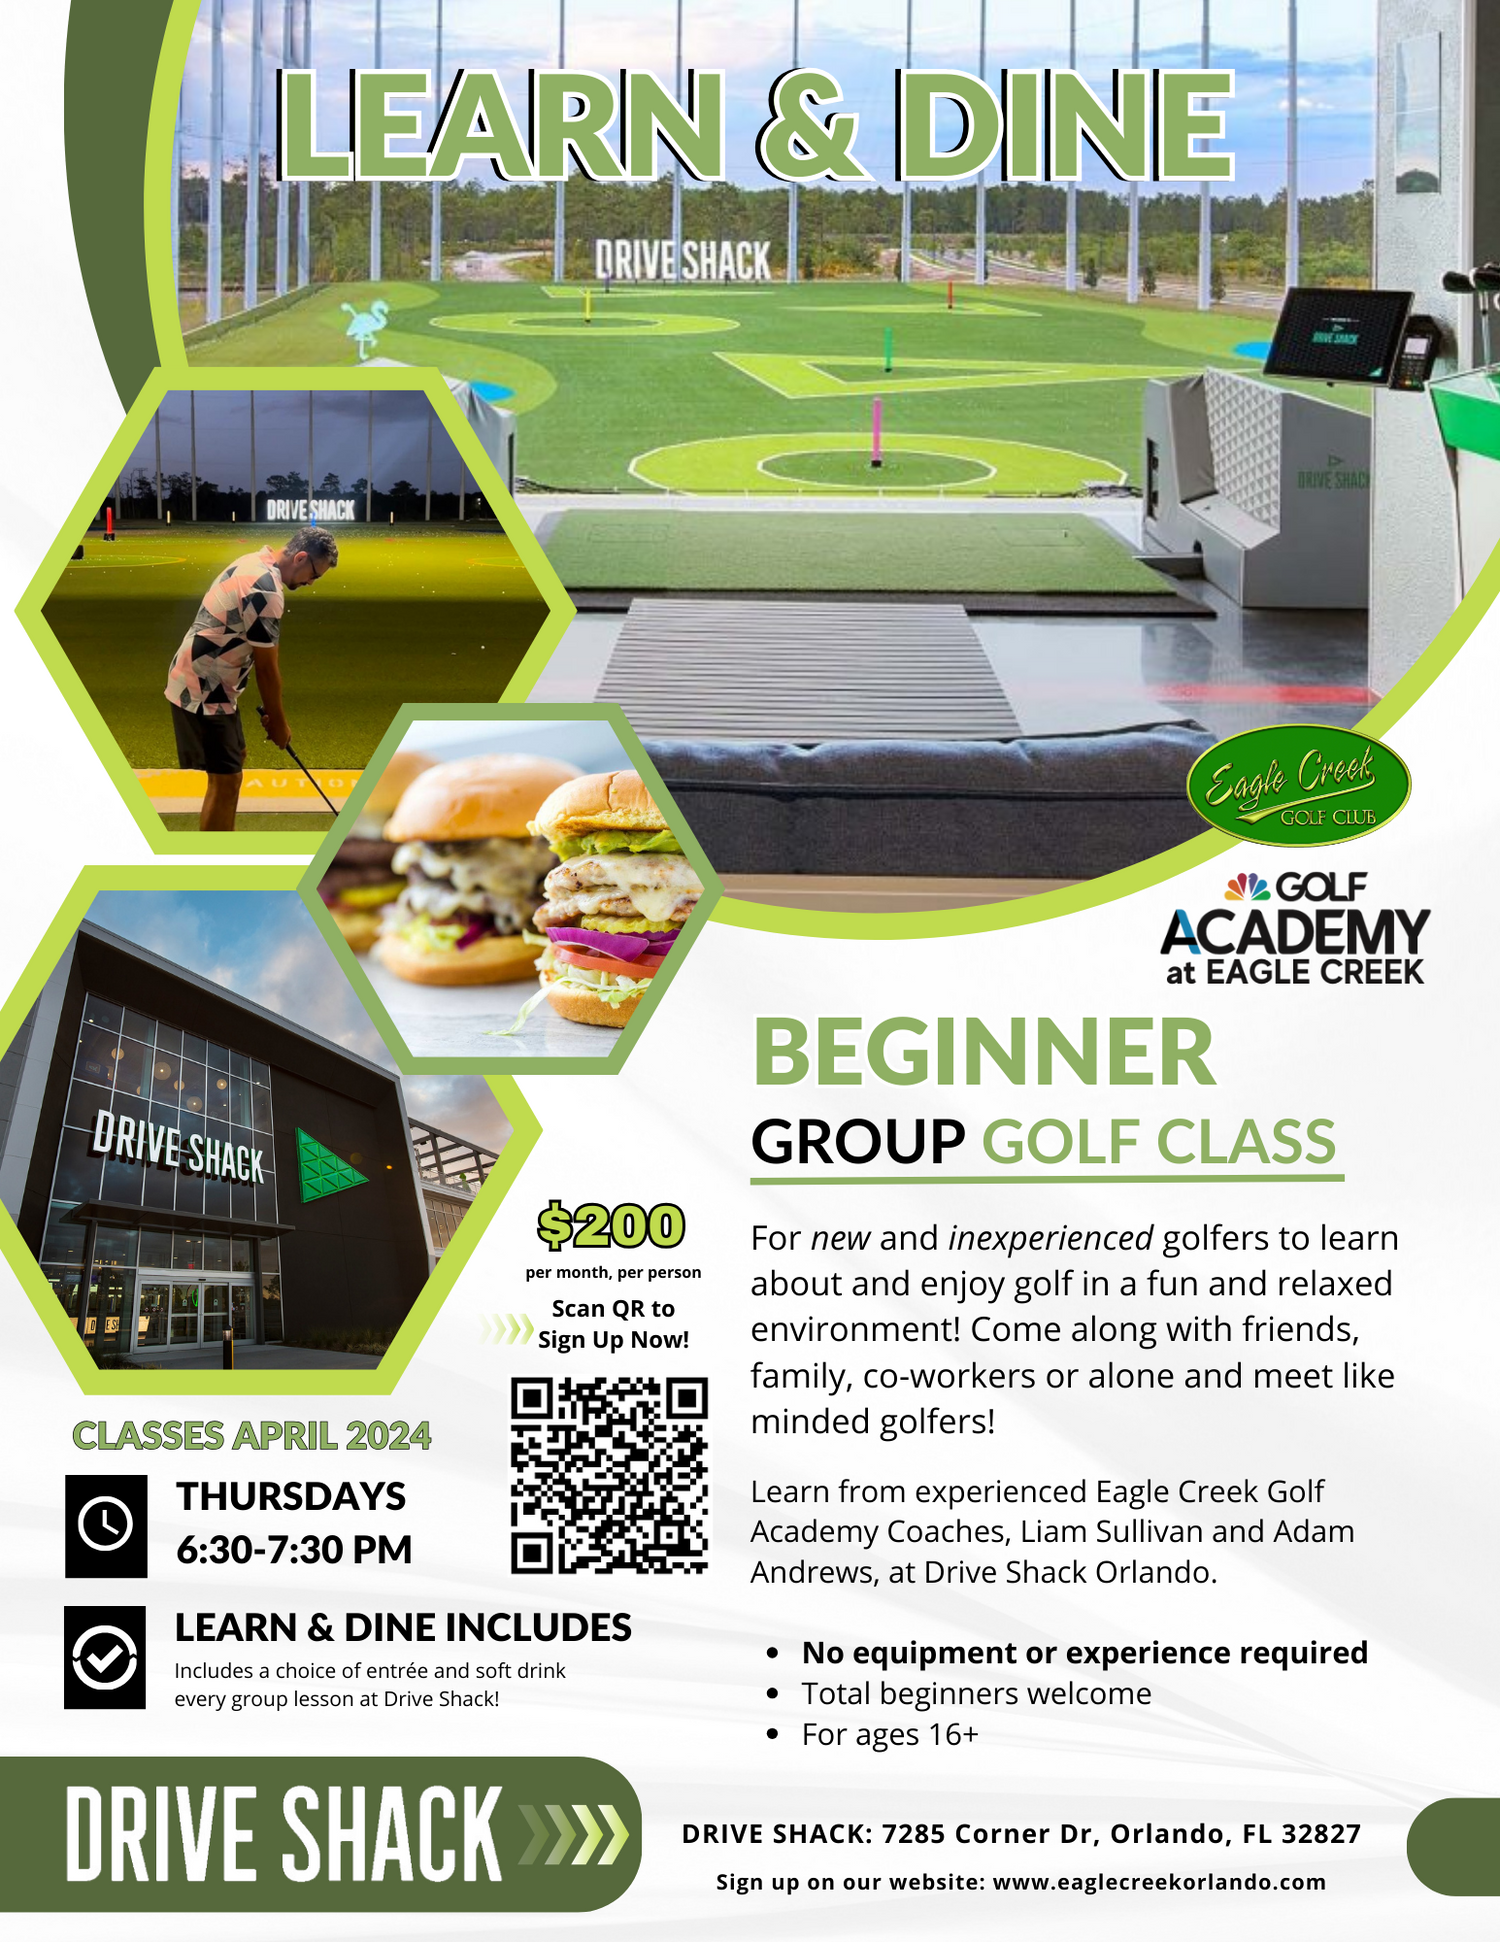 All Group Coaching Classes at The Golf Academy at Eagle Creek